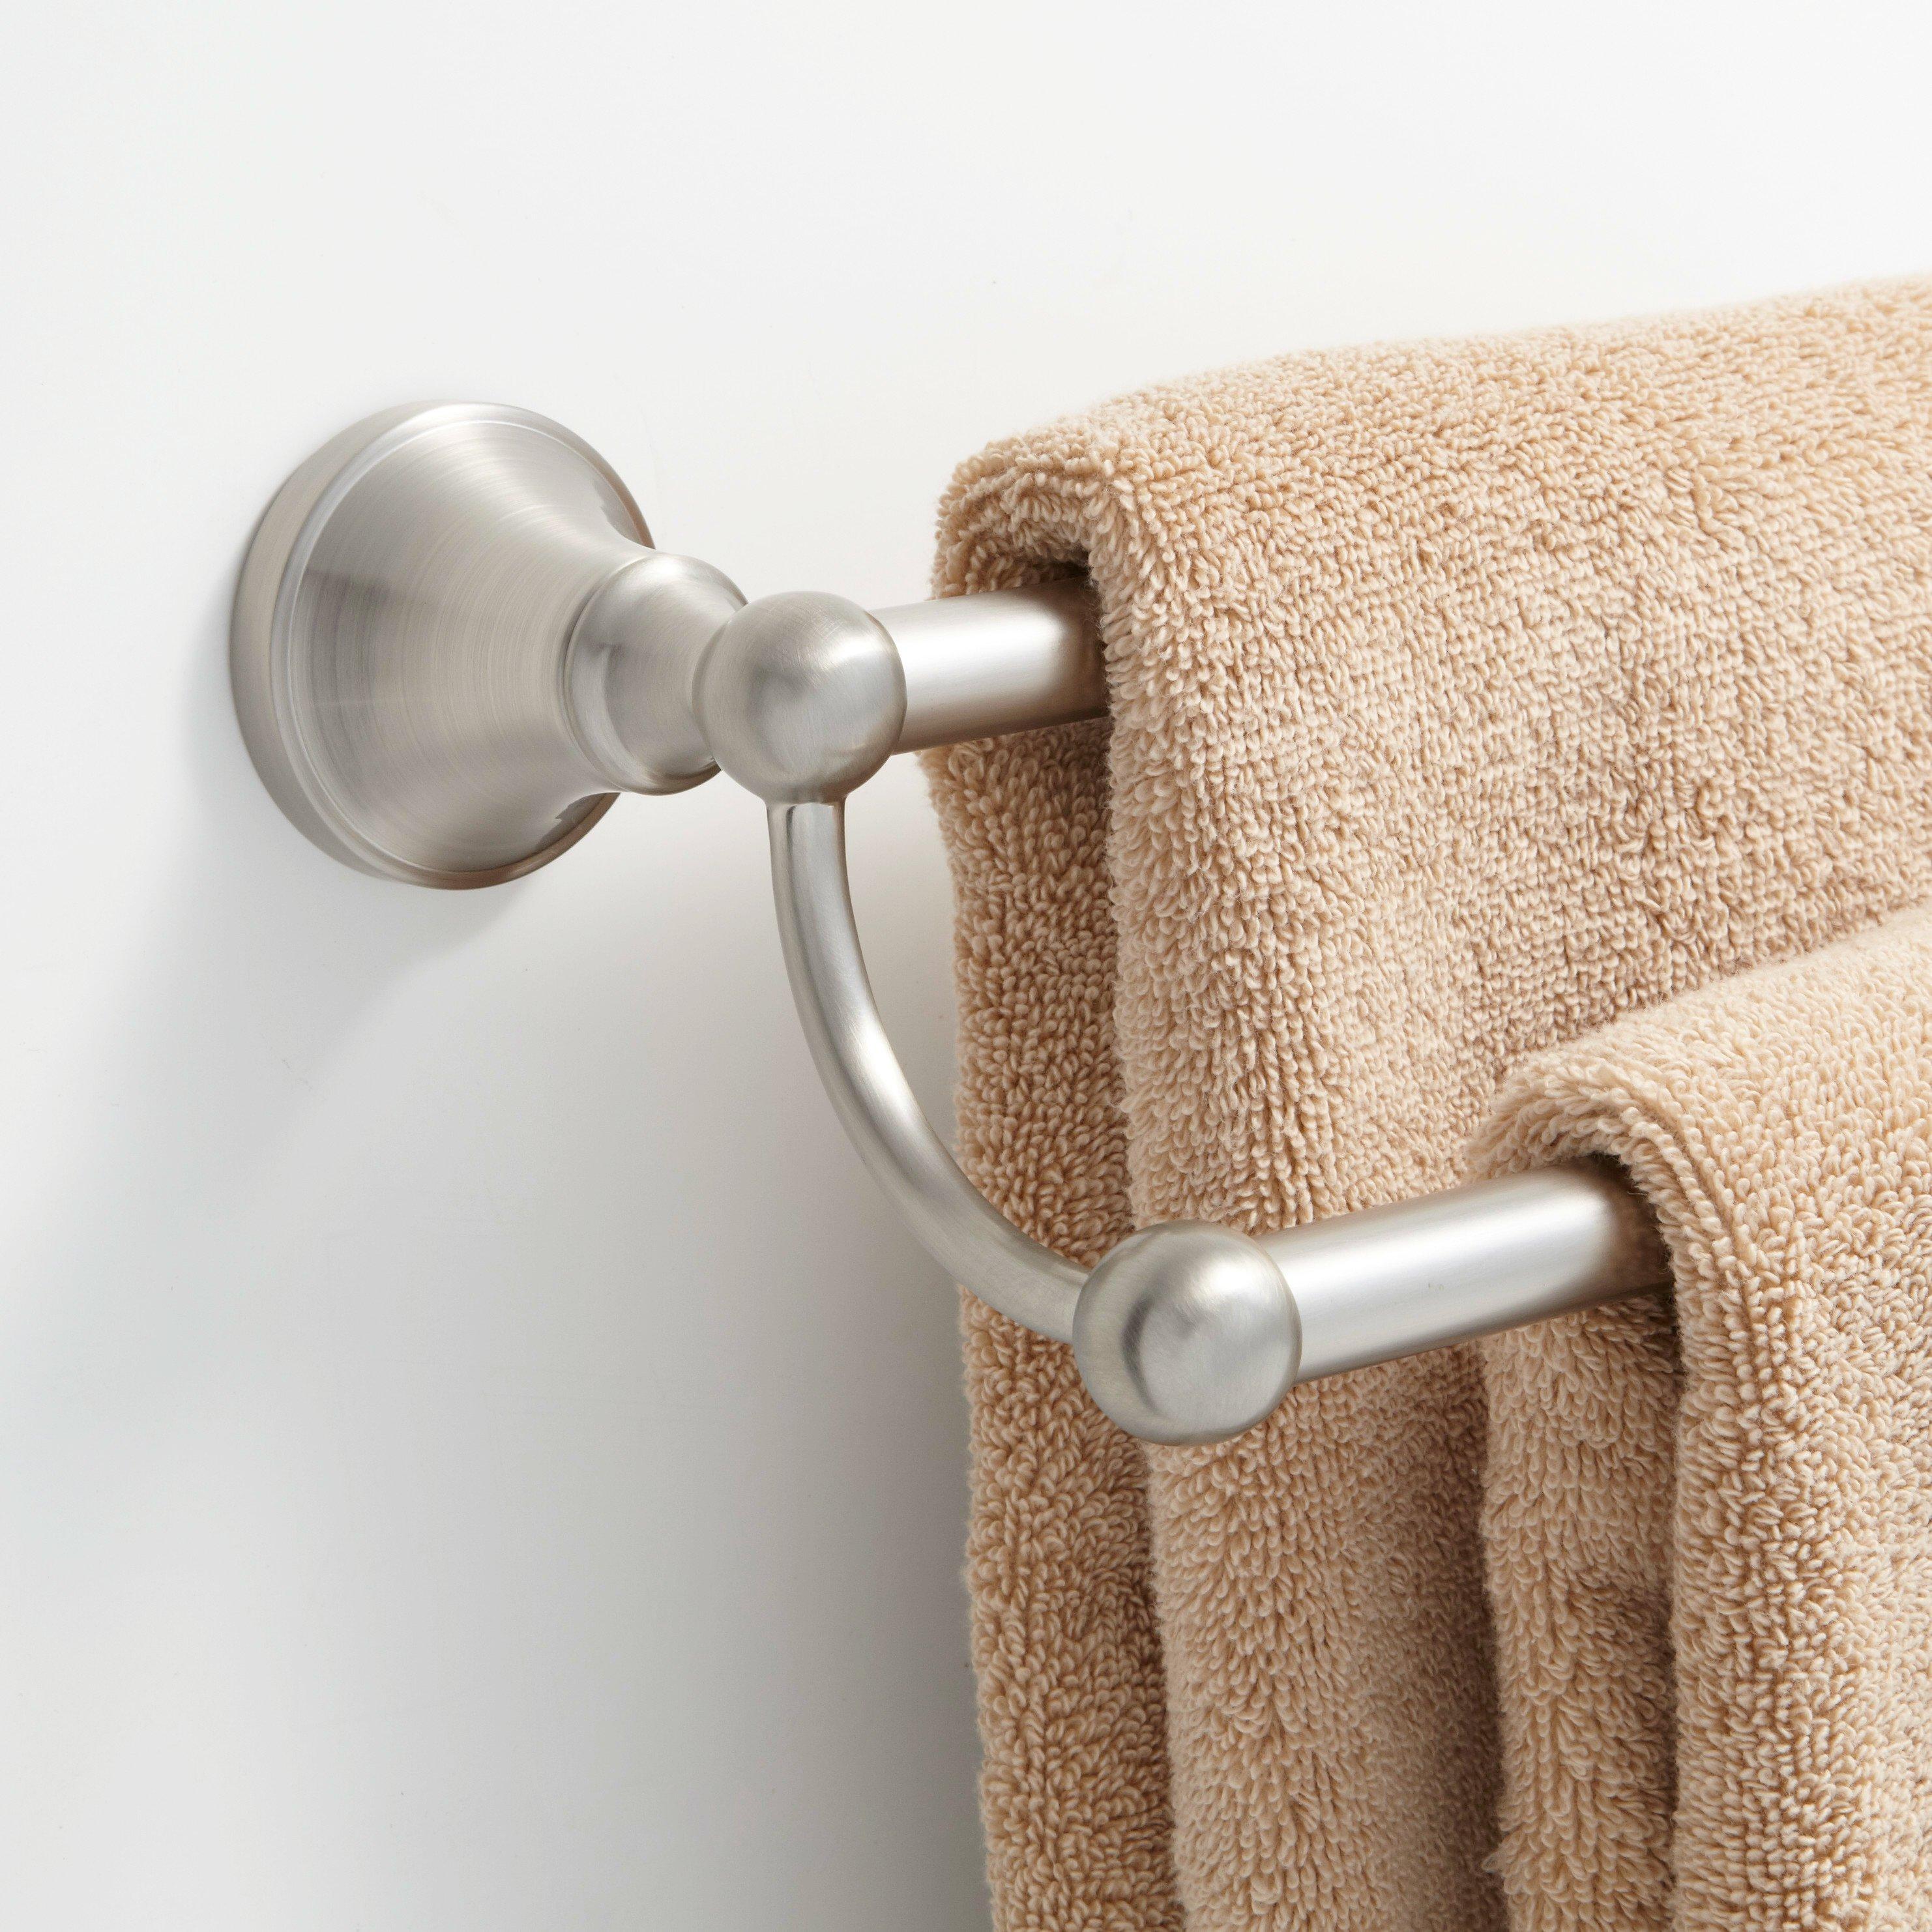 Command™ Stainless Steel Towel Bar 